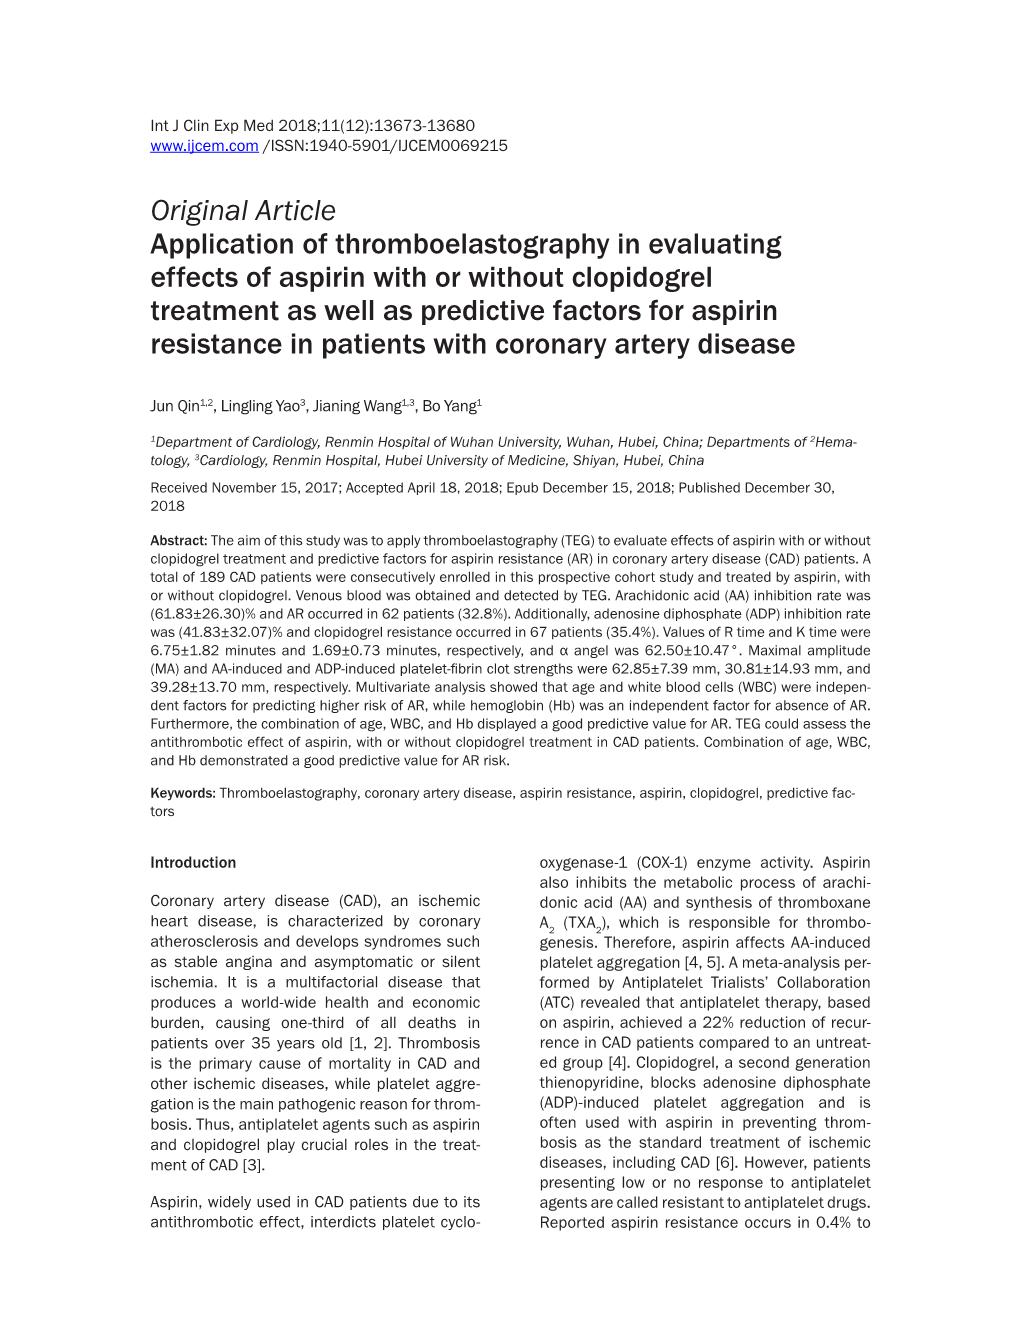 Original Article Application of Thromboelastography in Evaluating Effects of Aspirin with Or Without Clopidogrel Treatment As